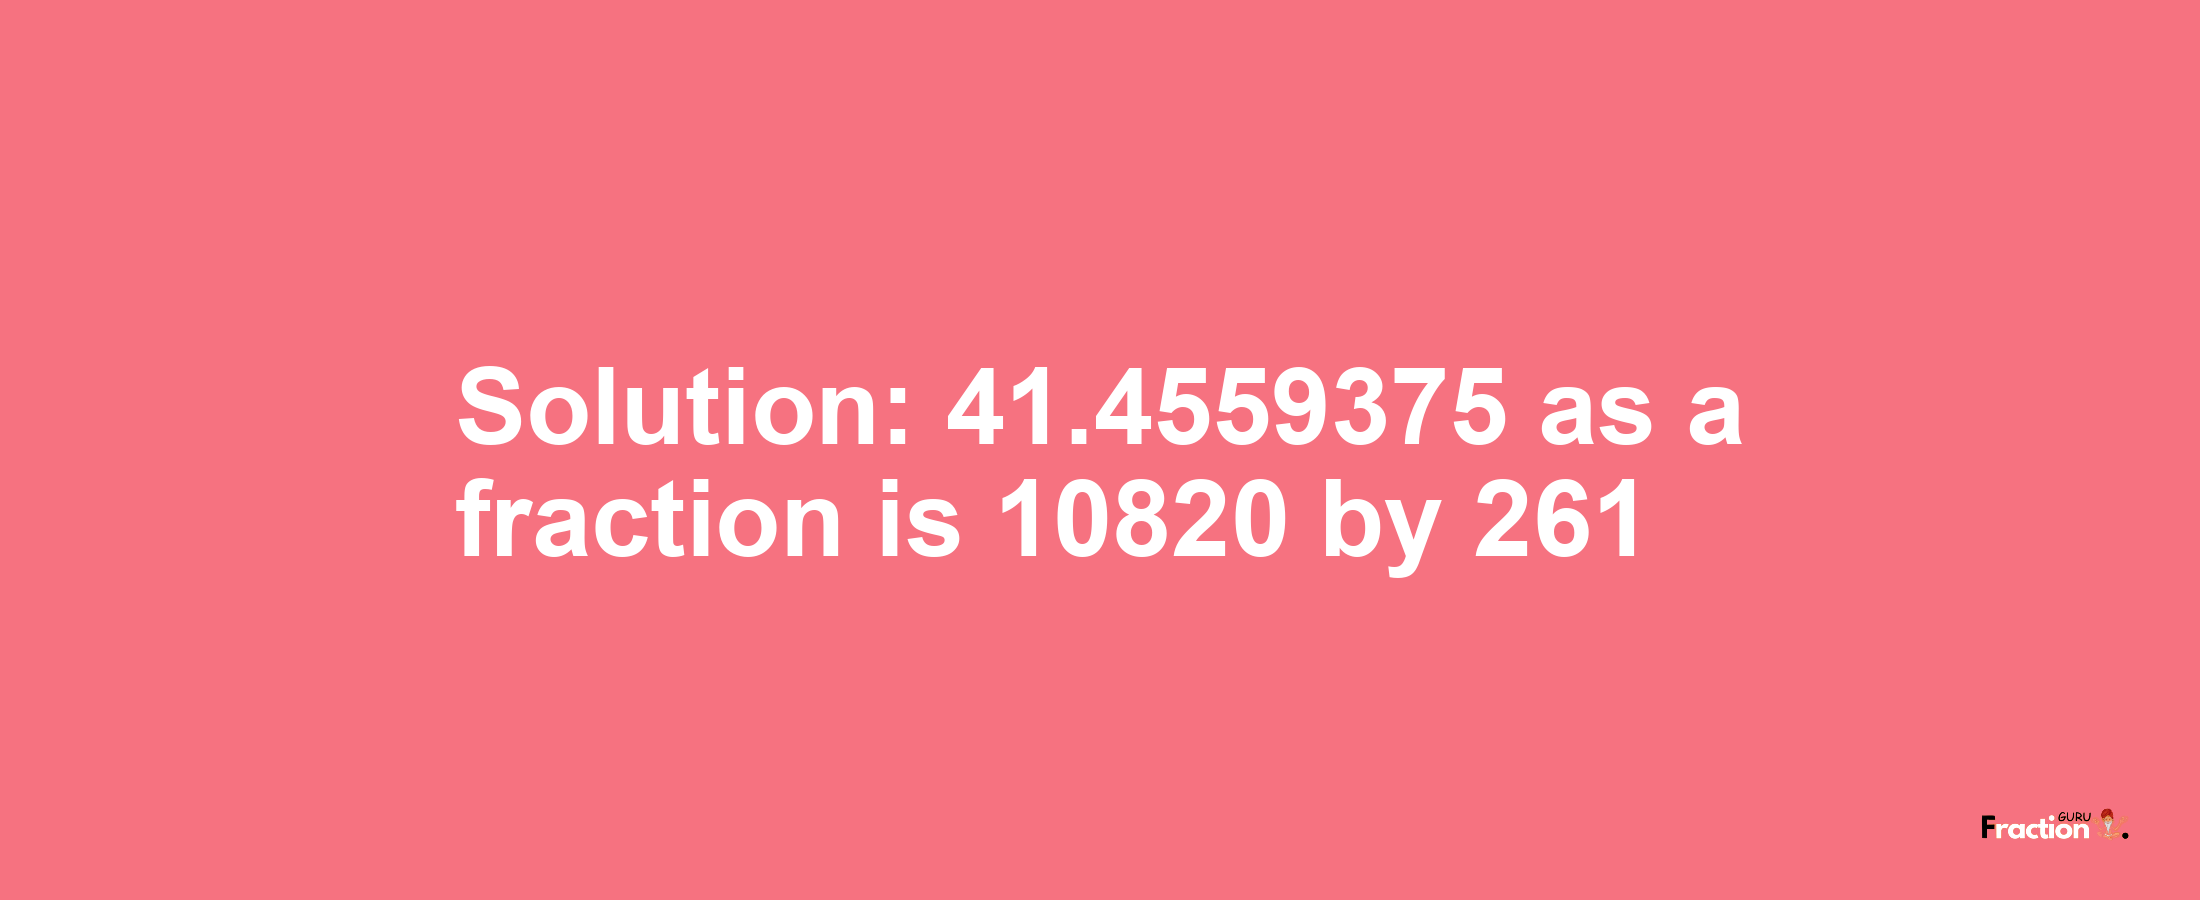 Solution:41.4559375 as a fraction is 10820/261